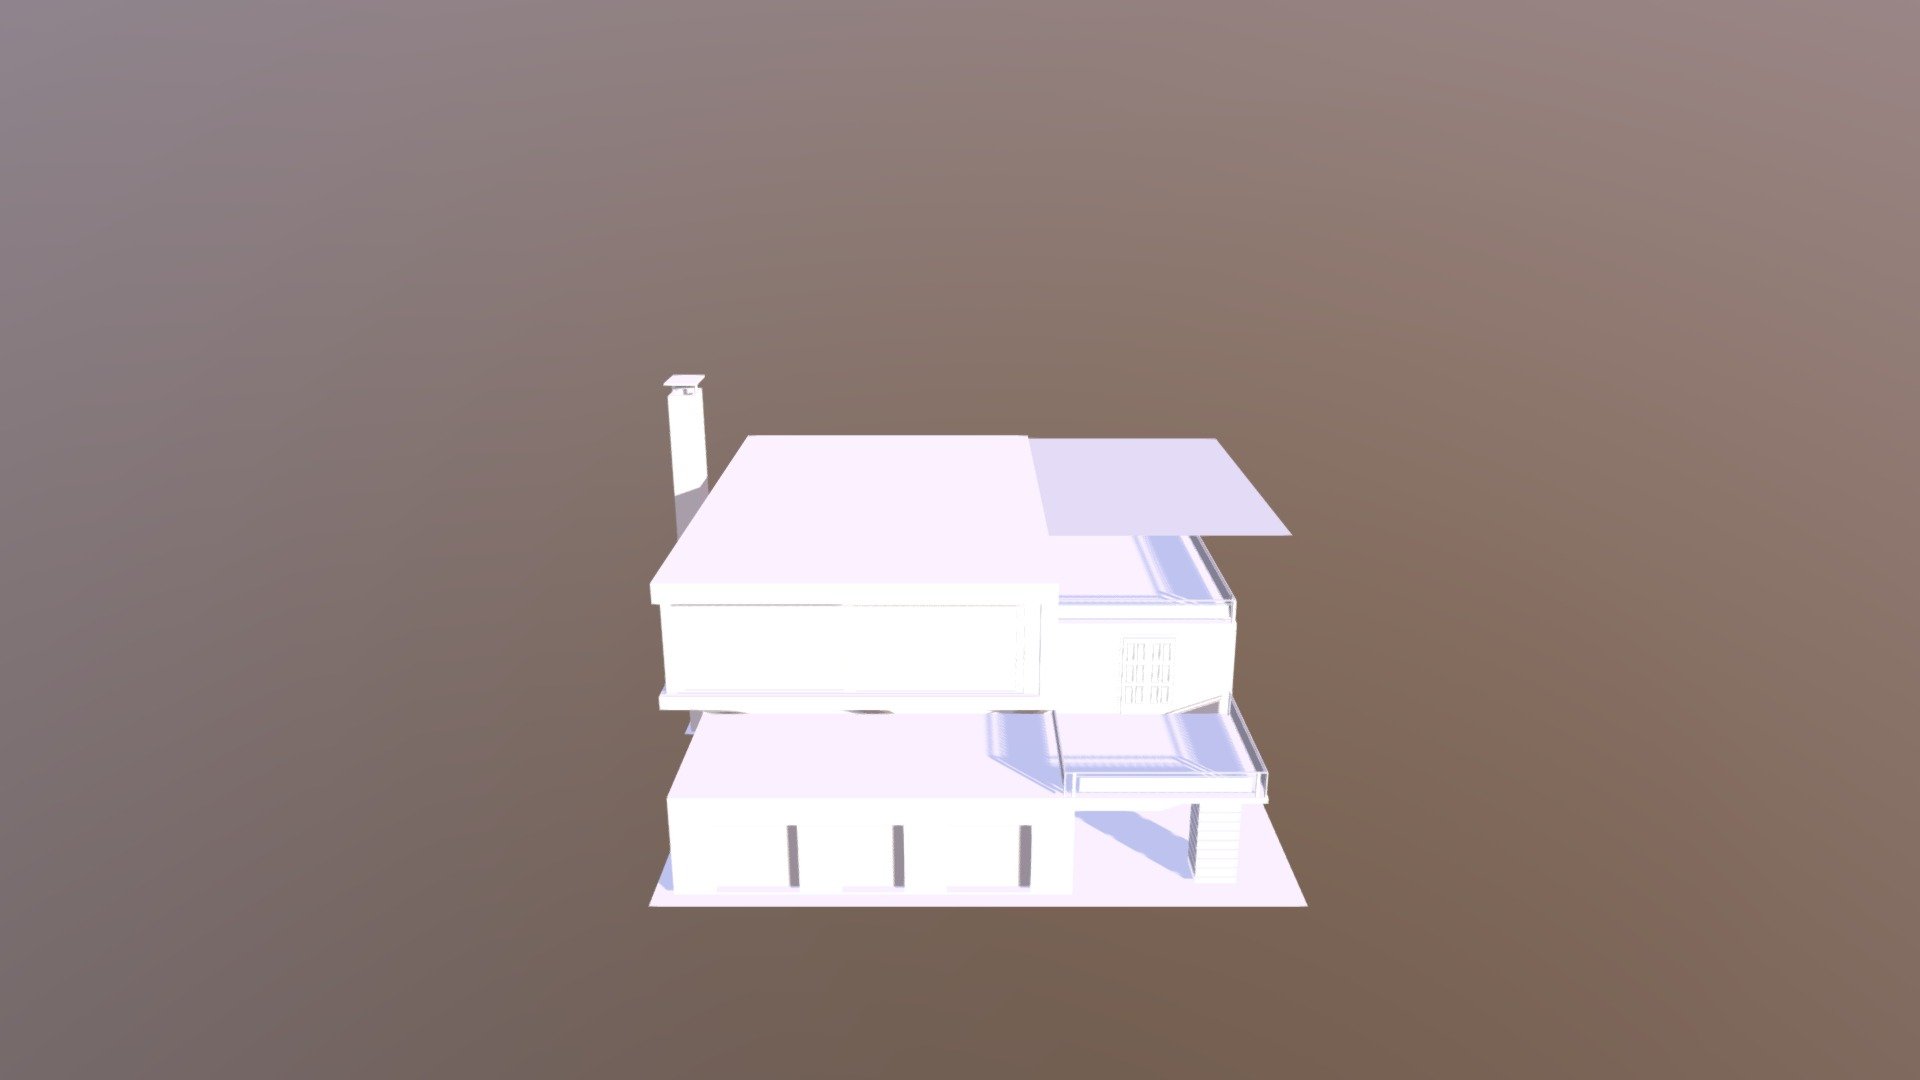 Modern House (No Materials and No Furniture)